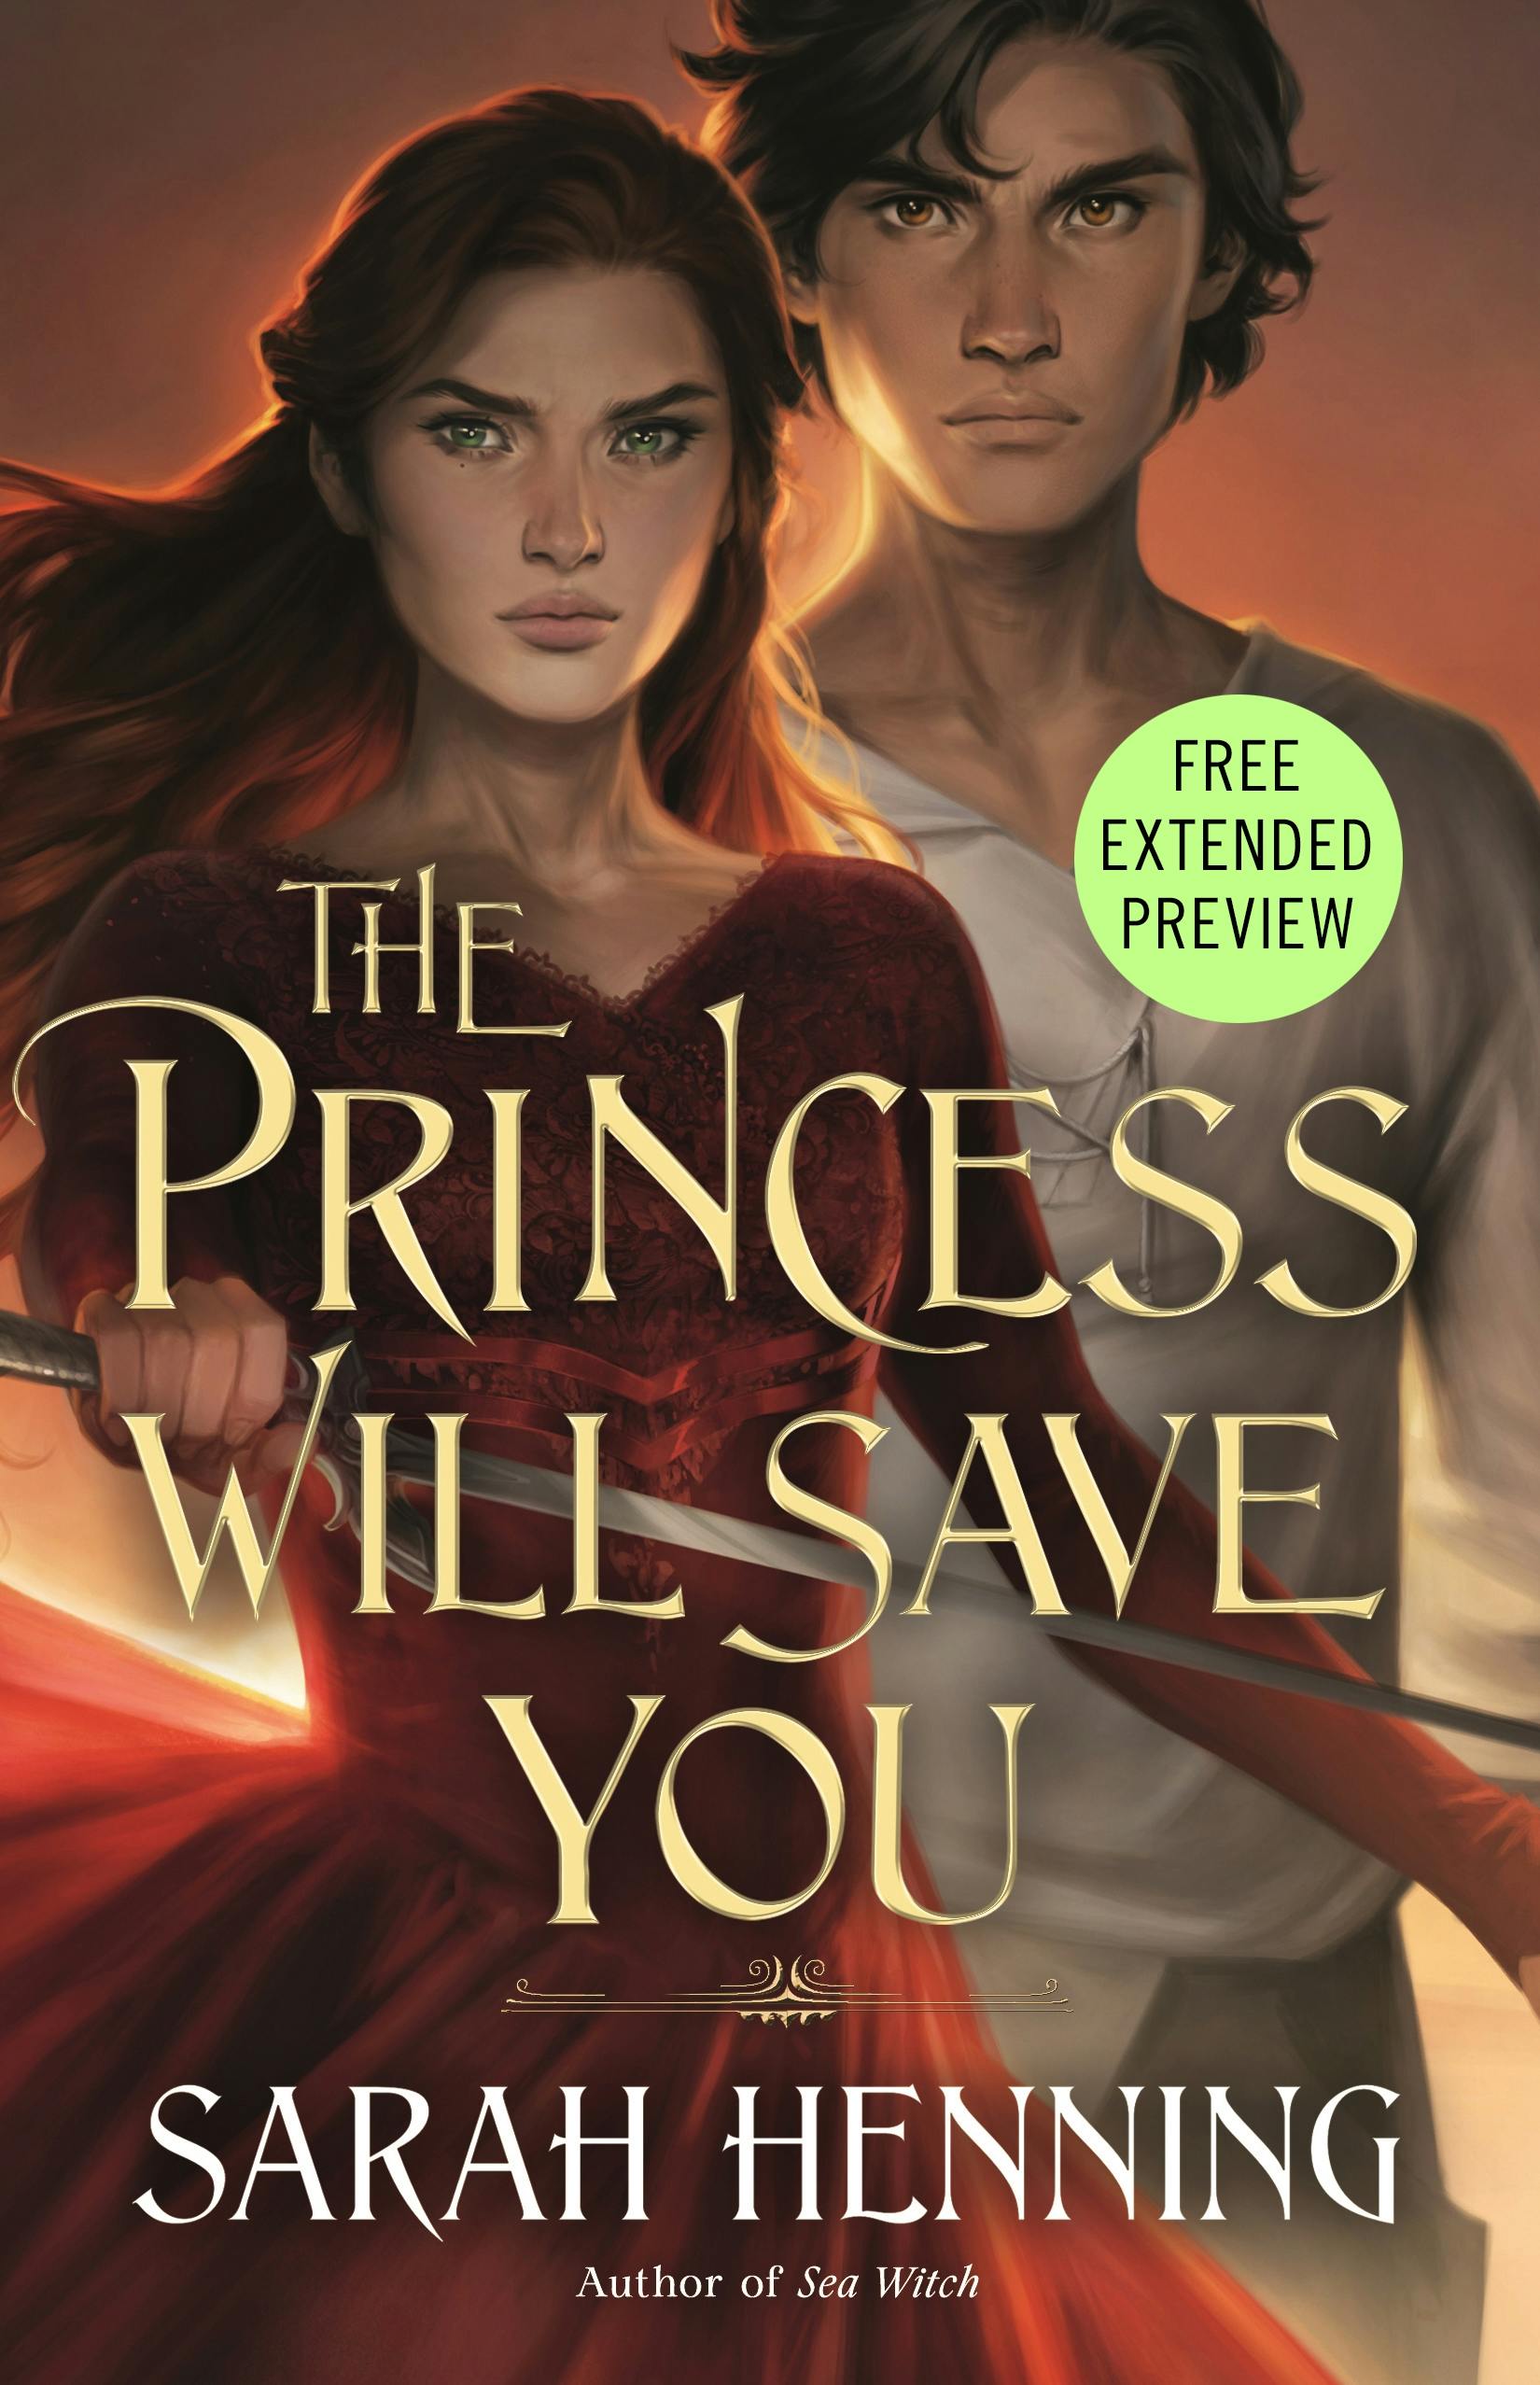 Cover for the book titled as: The Princess Will Save You Sneak Peek